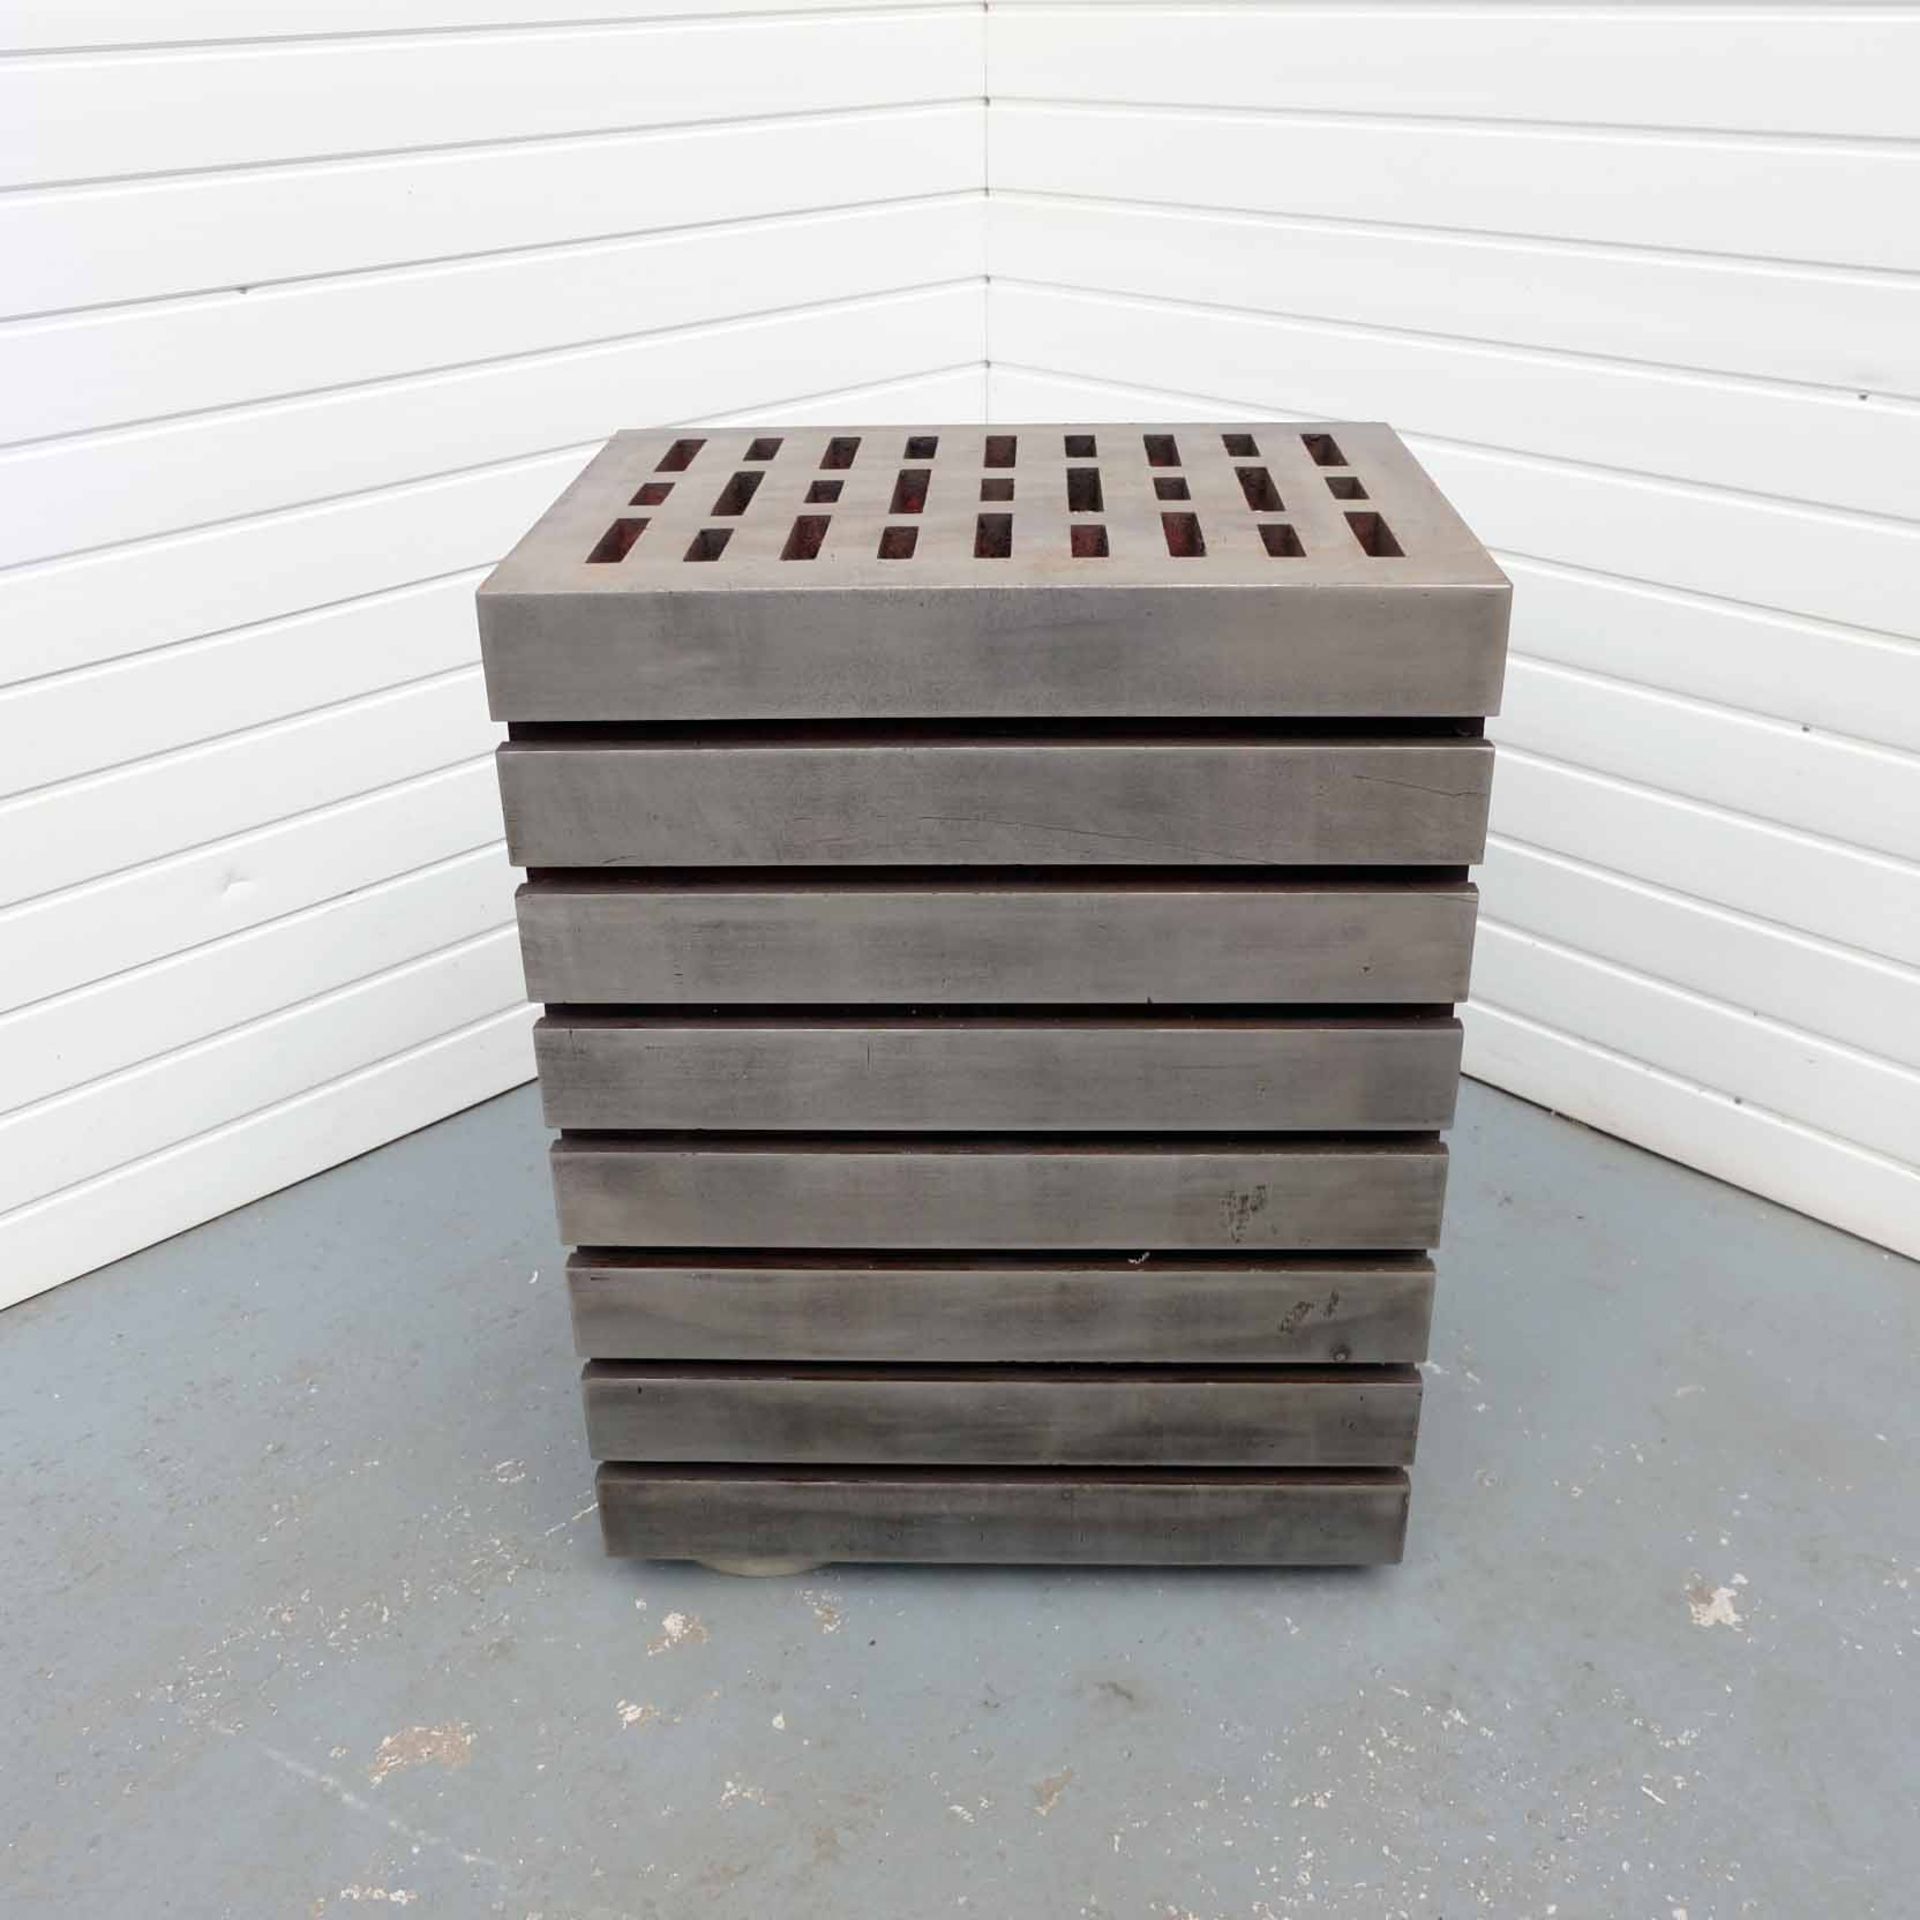 Tee Slotted Cube. Size 30" x 24" x 18". Tee Slotted on 30" x 24" Side. - Bild 6 aus 6